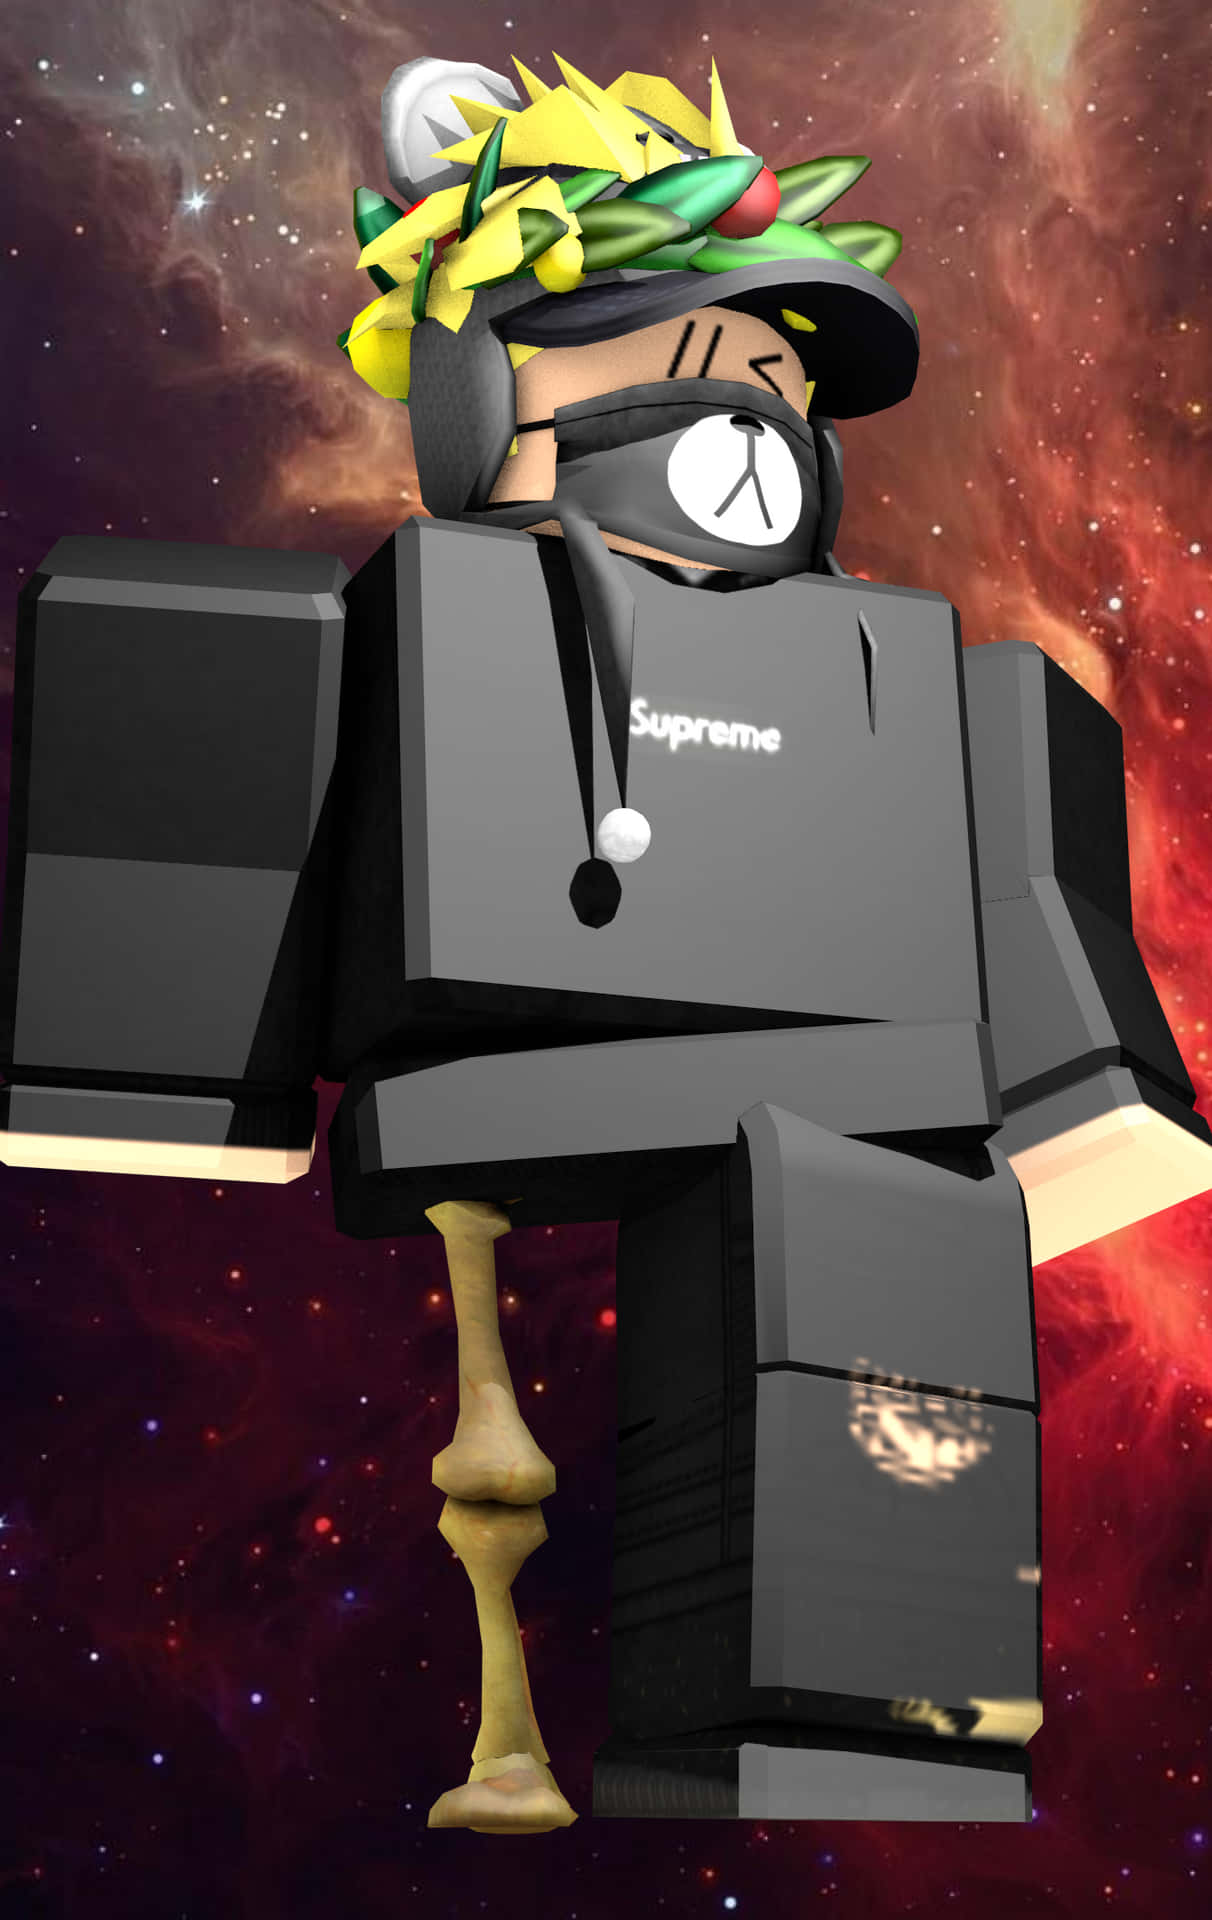 100+] Roblox Iphone Wallpapers